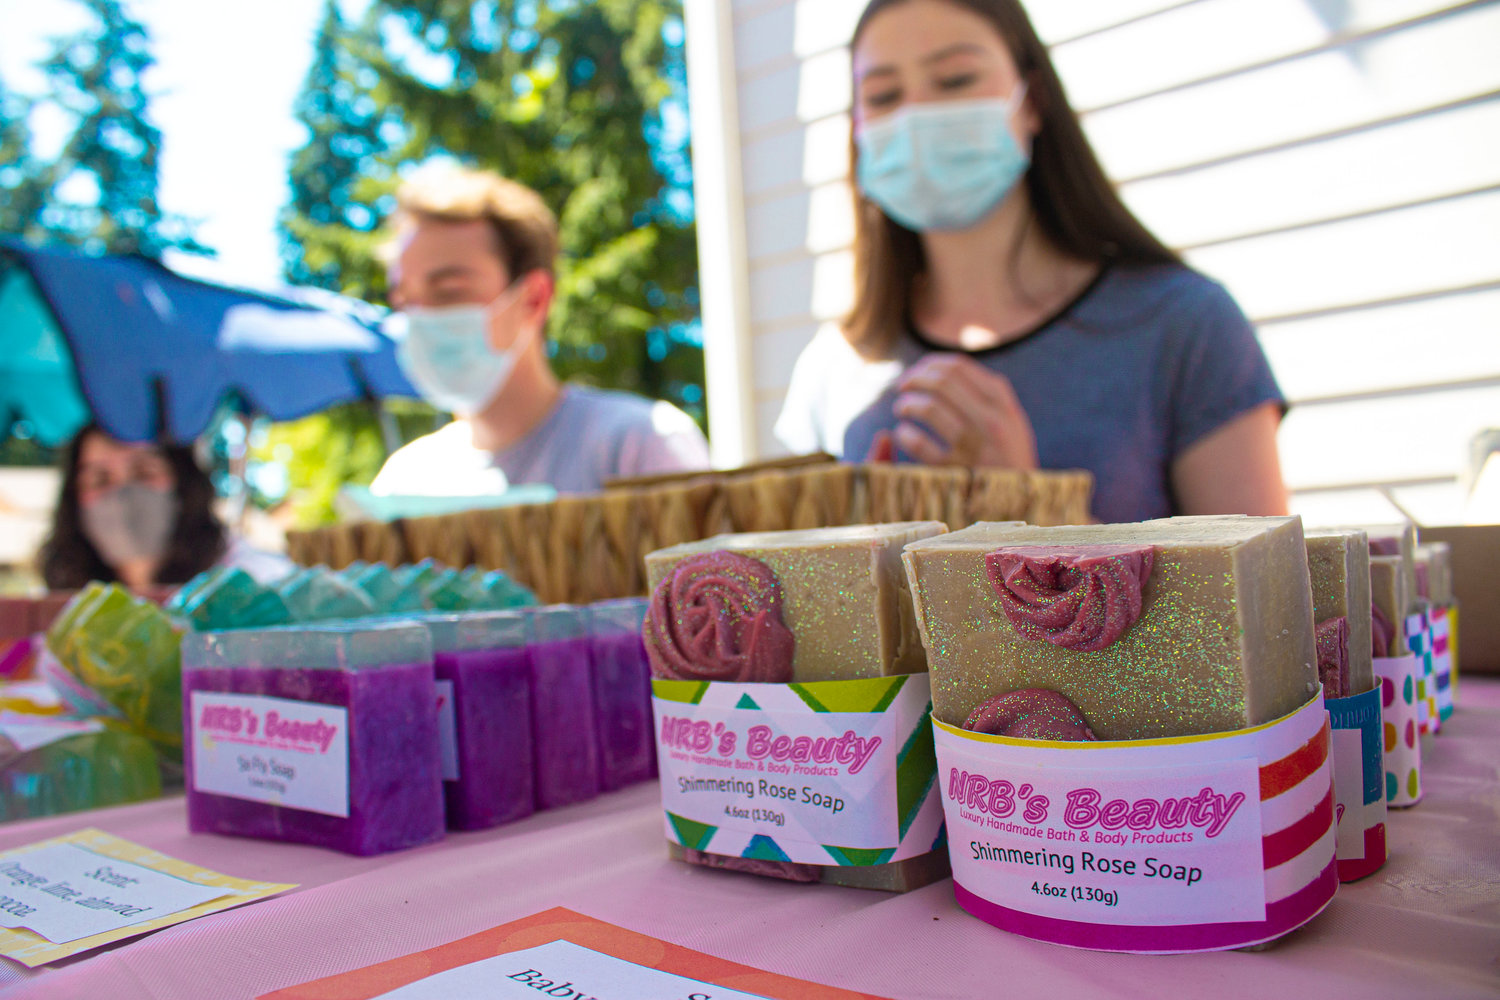 Naomi Barer, 16, started her own soap company, NRB's Beauty, in March. Her first quarter of sales was so successful, she said, that she wanted to host two pop-up shops this summer to celebrate.